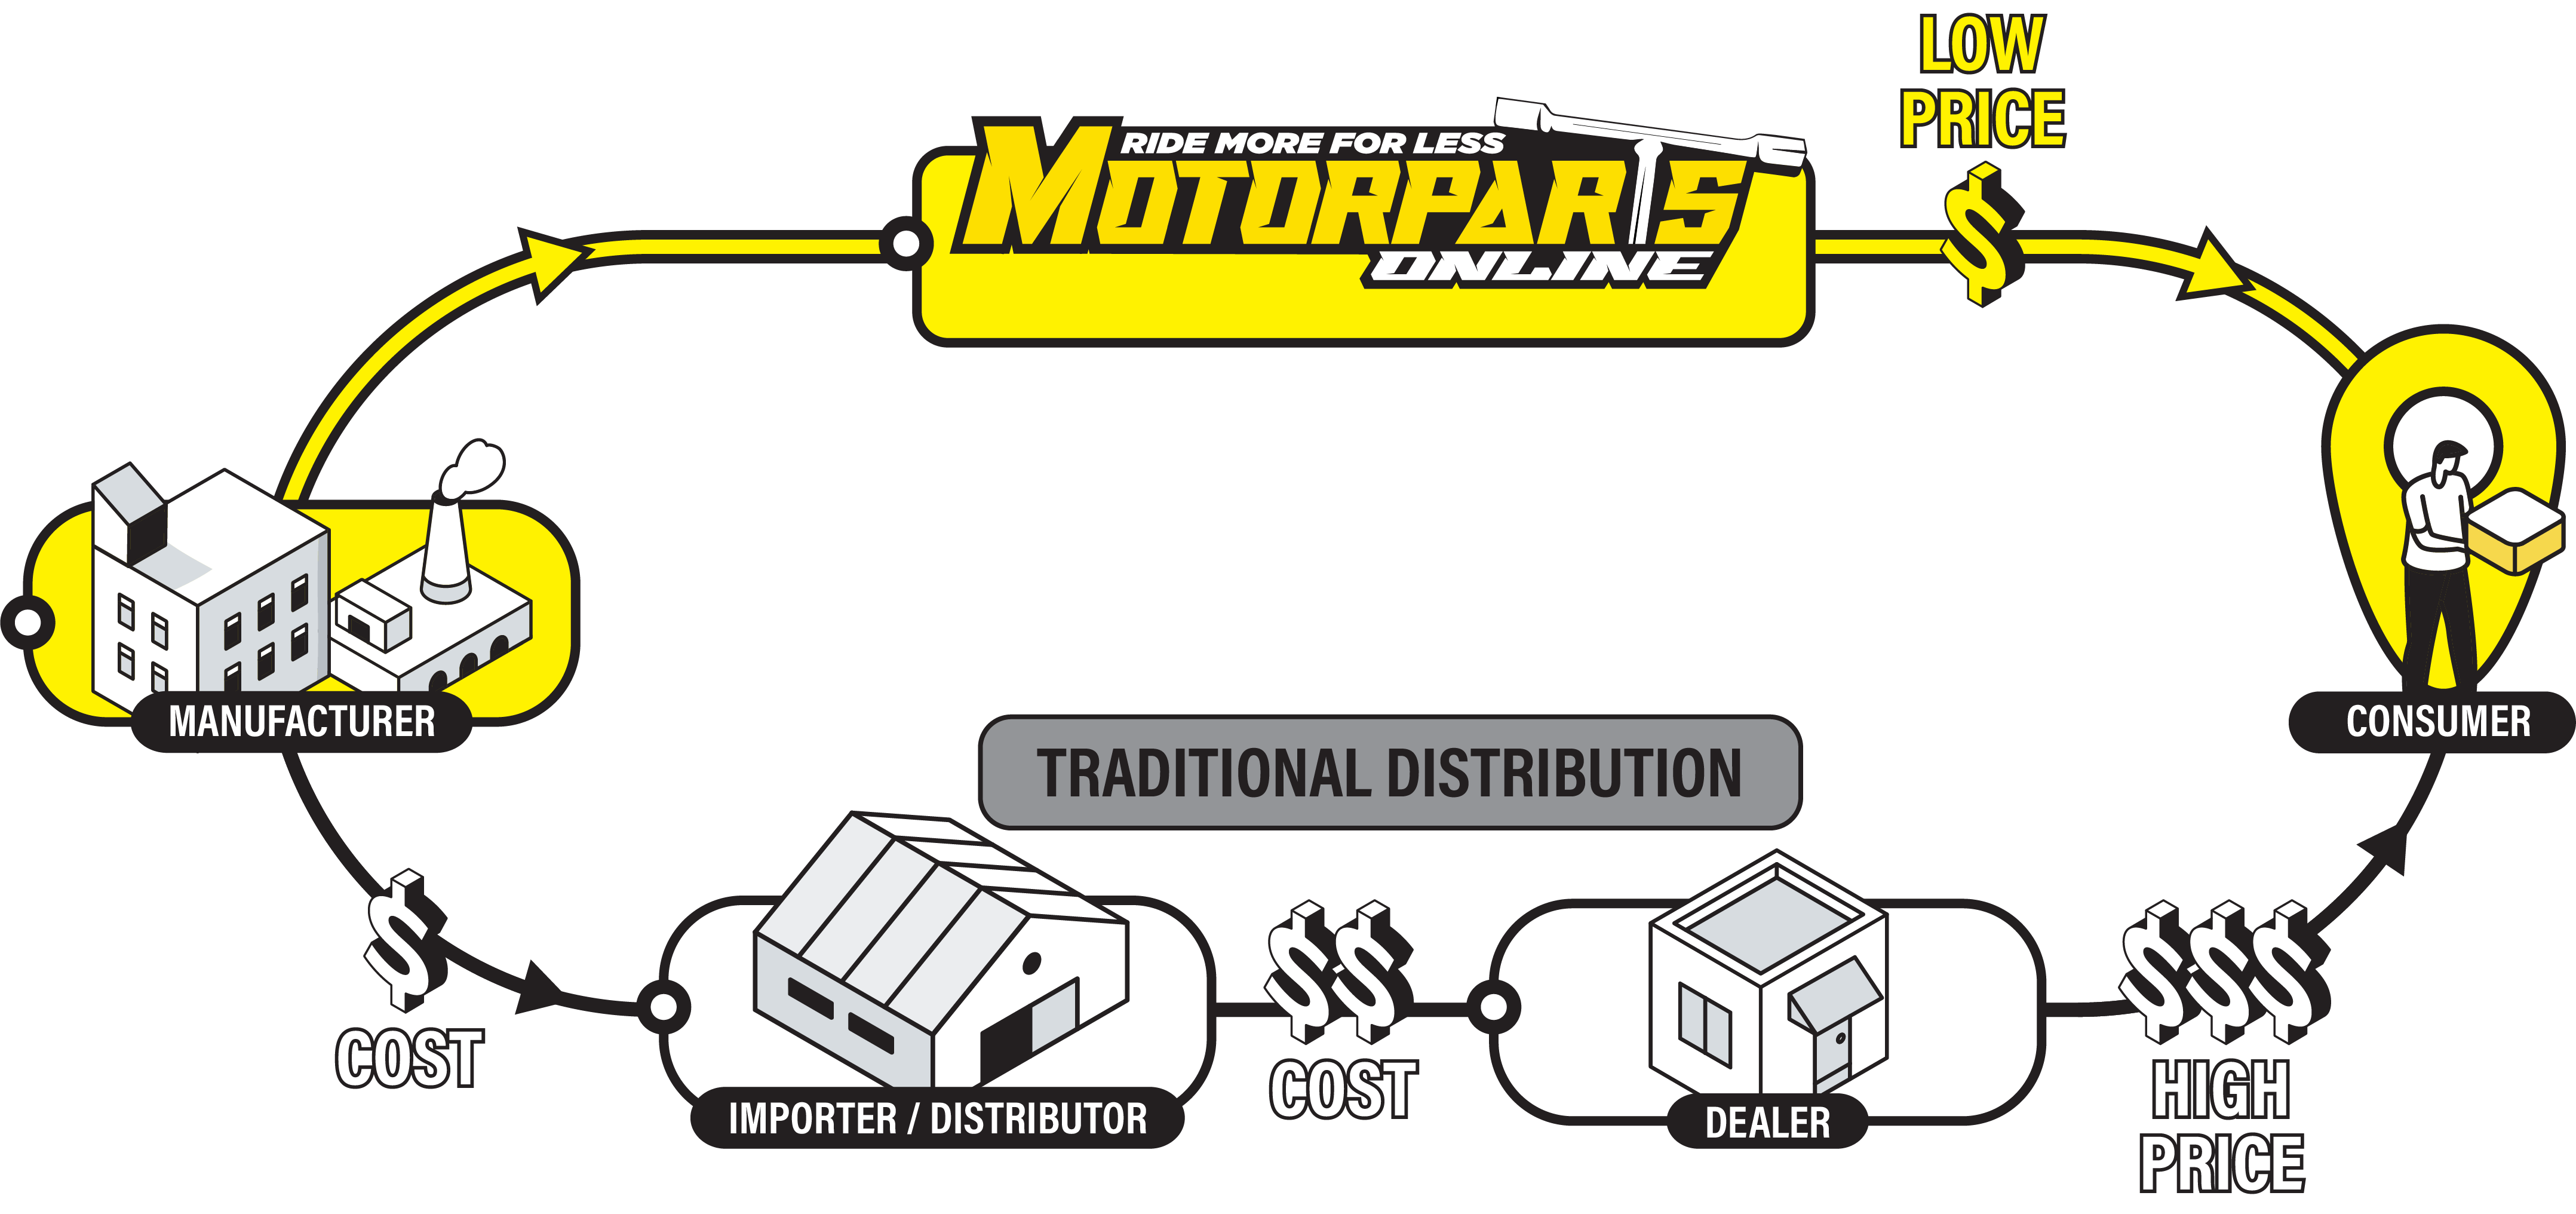 Solfili will be available on Motorparts Online too!